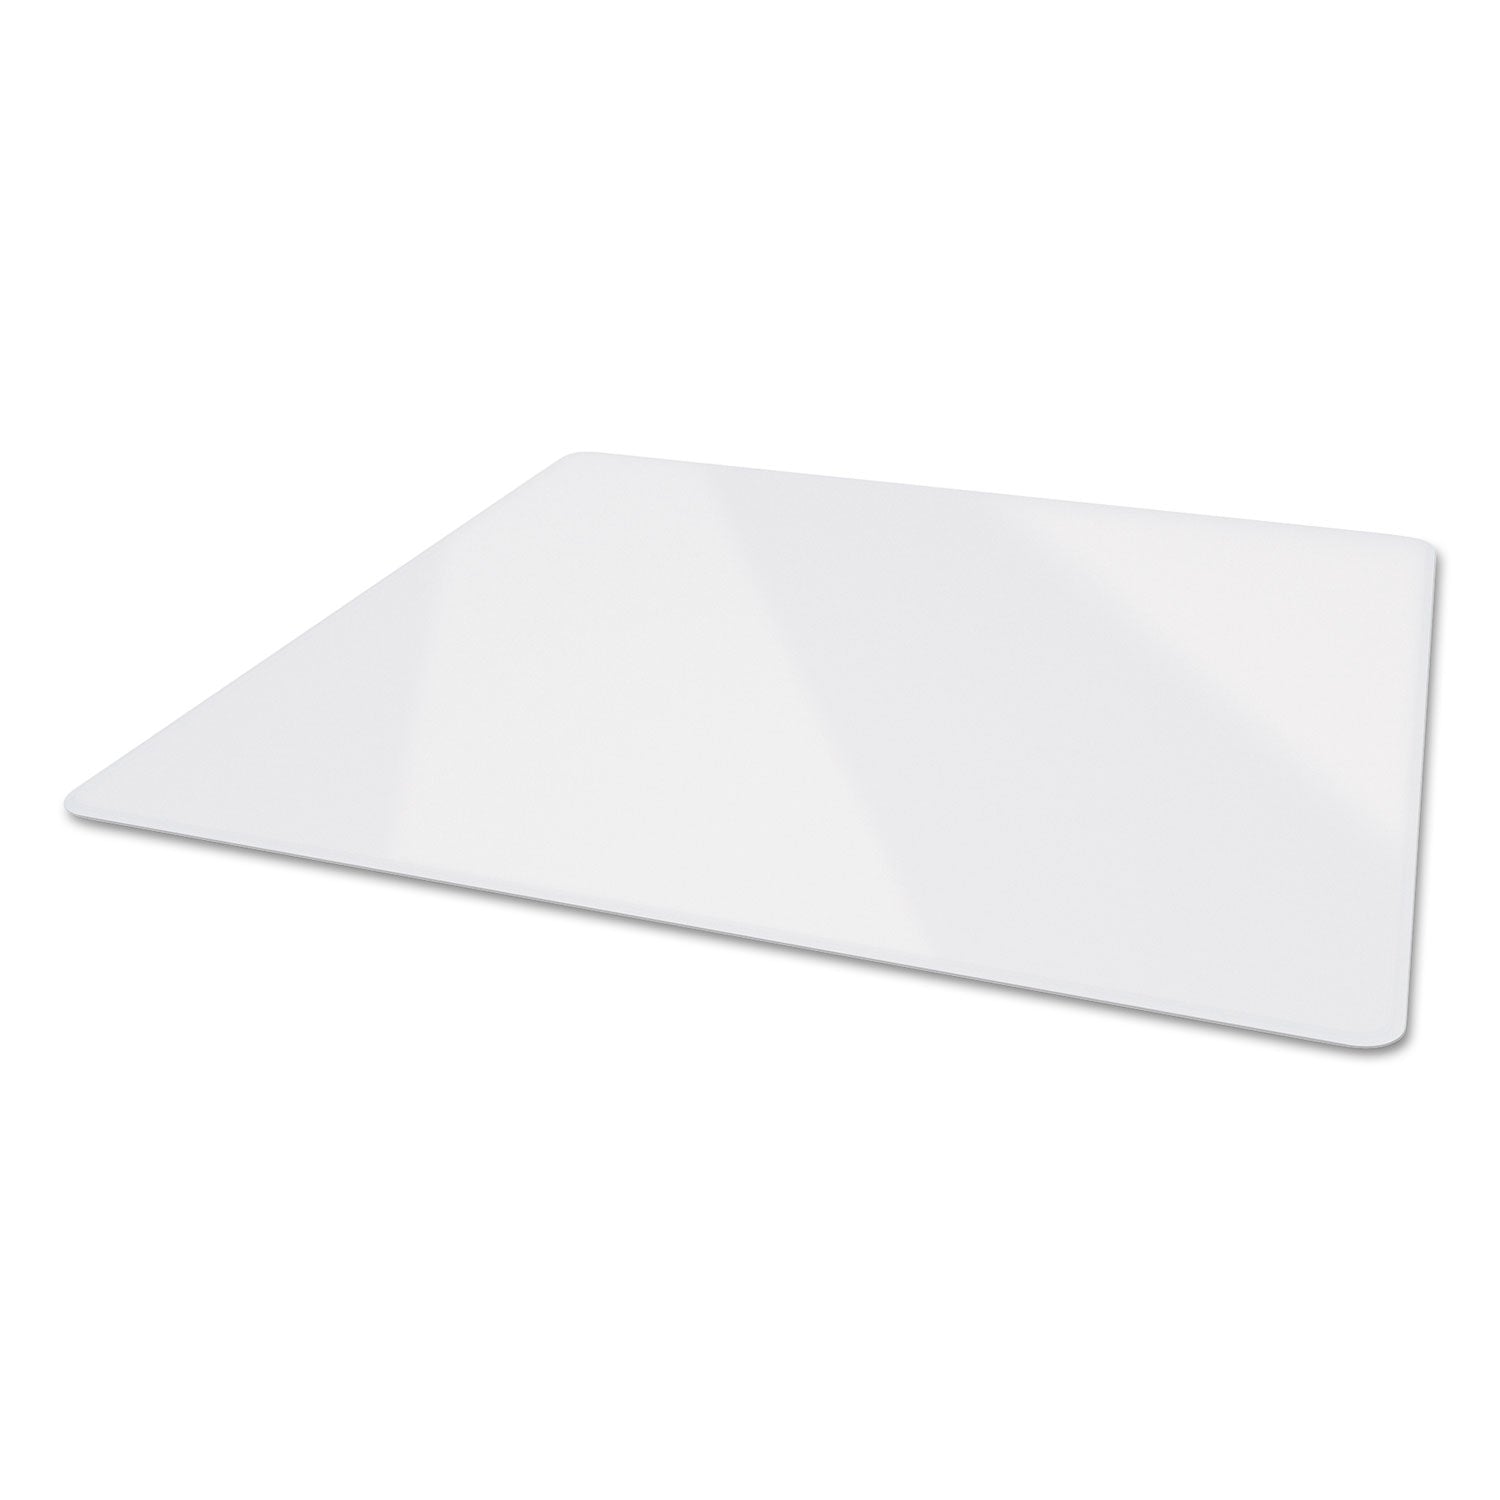 premium-glass-all-day-use-chair-mat--all-floor-types-36-x-46-rectangular-clear_defcmg70433646 - 3